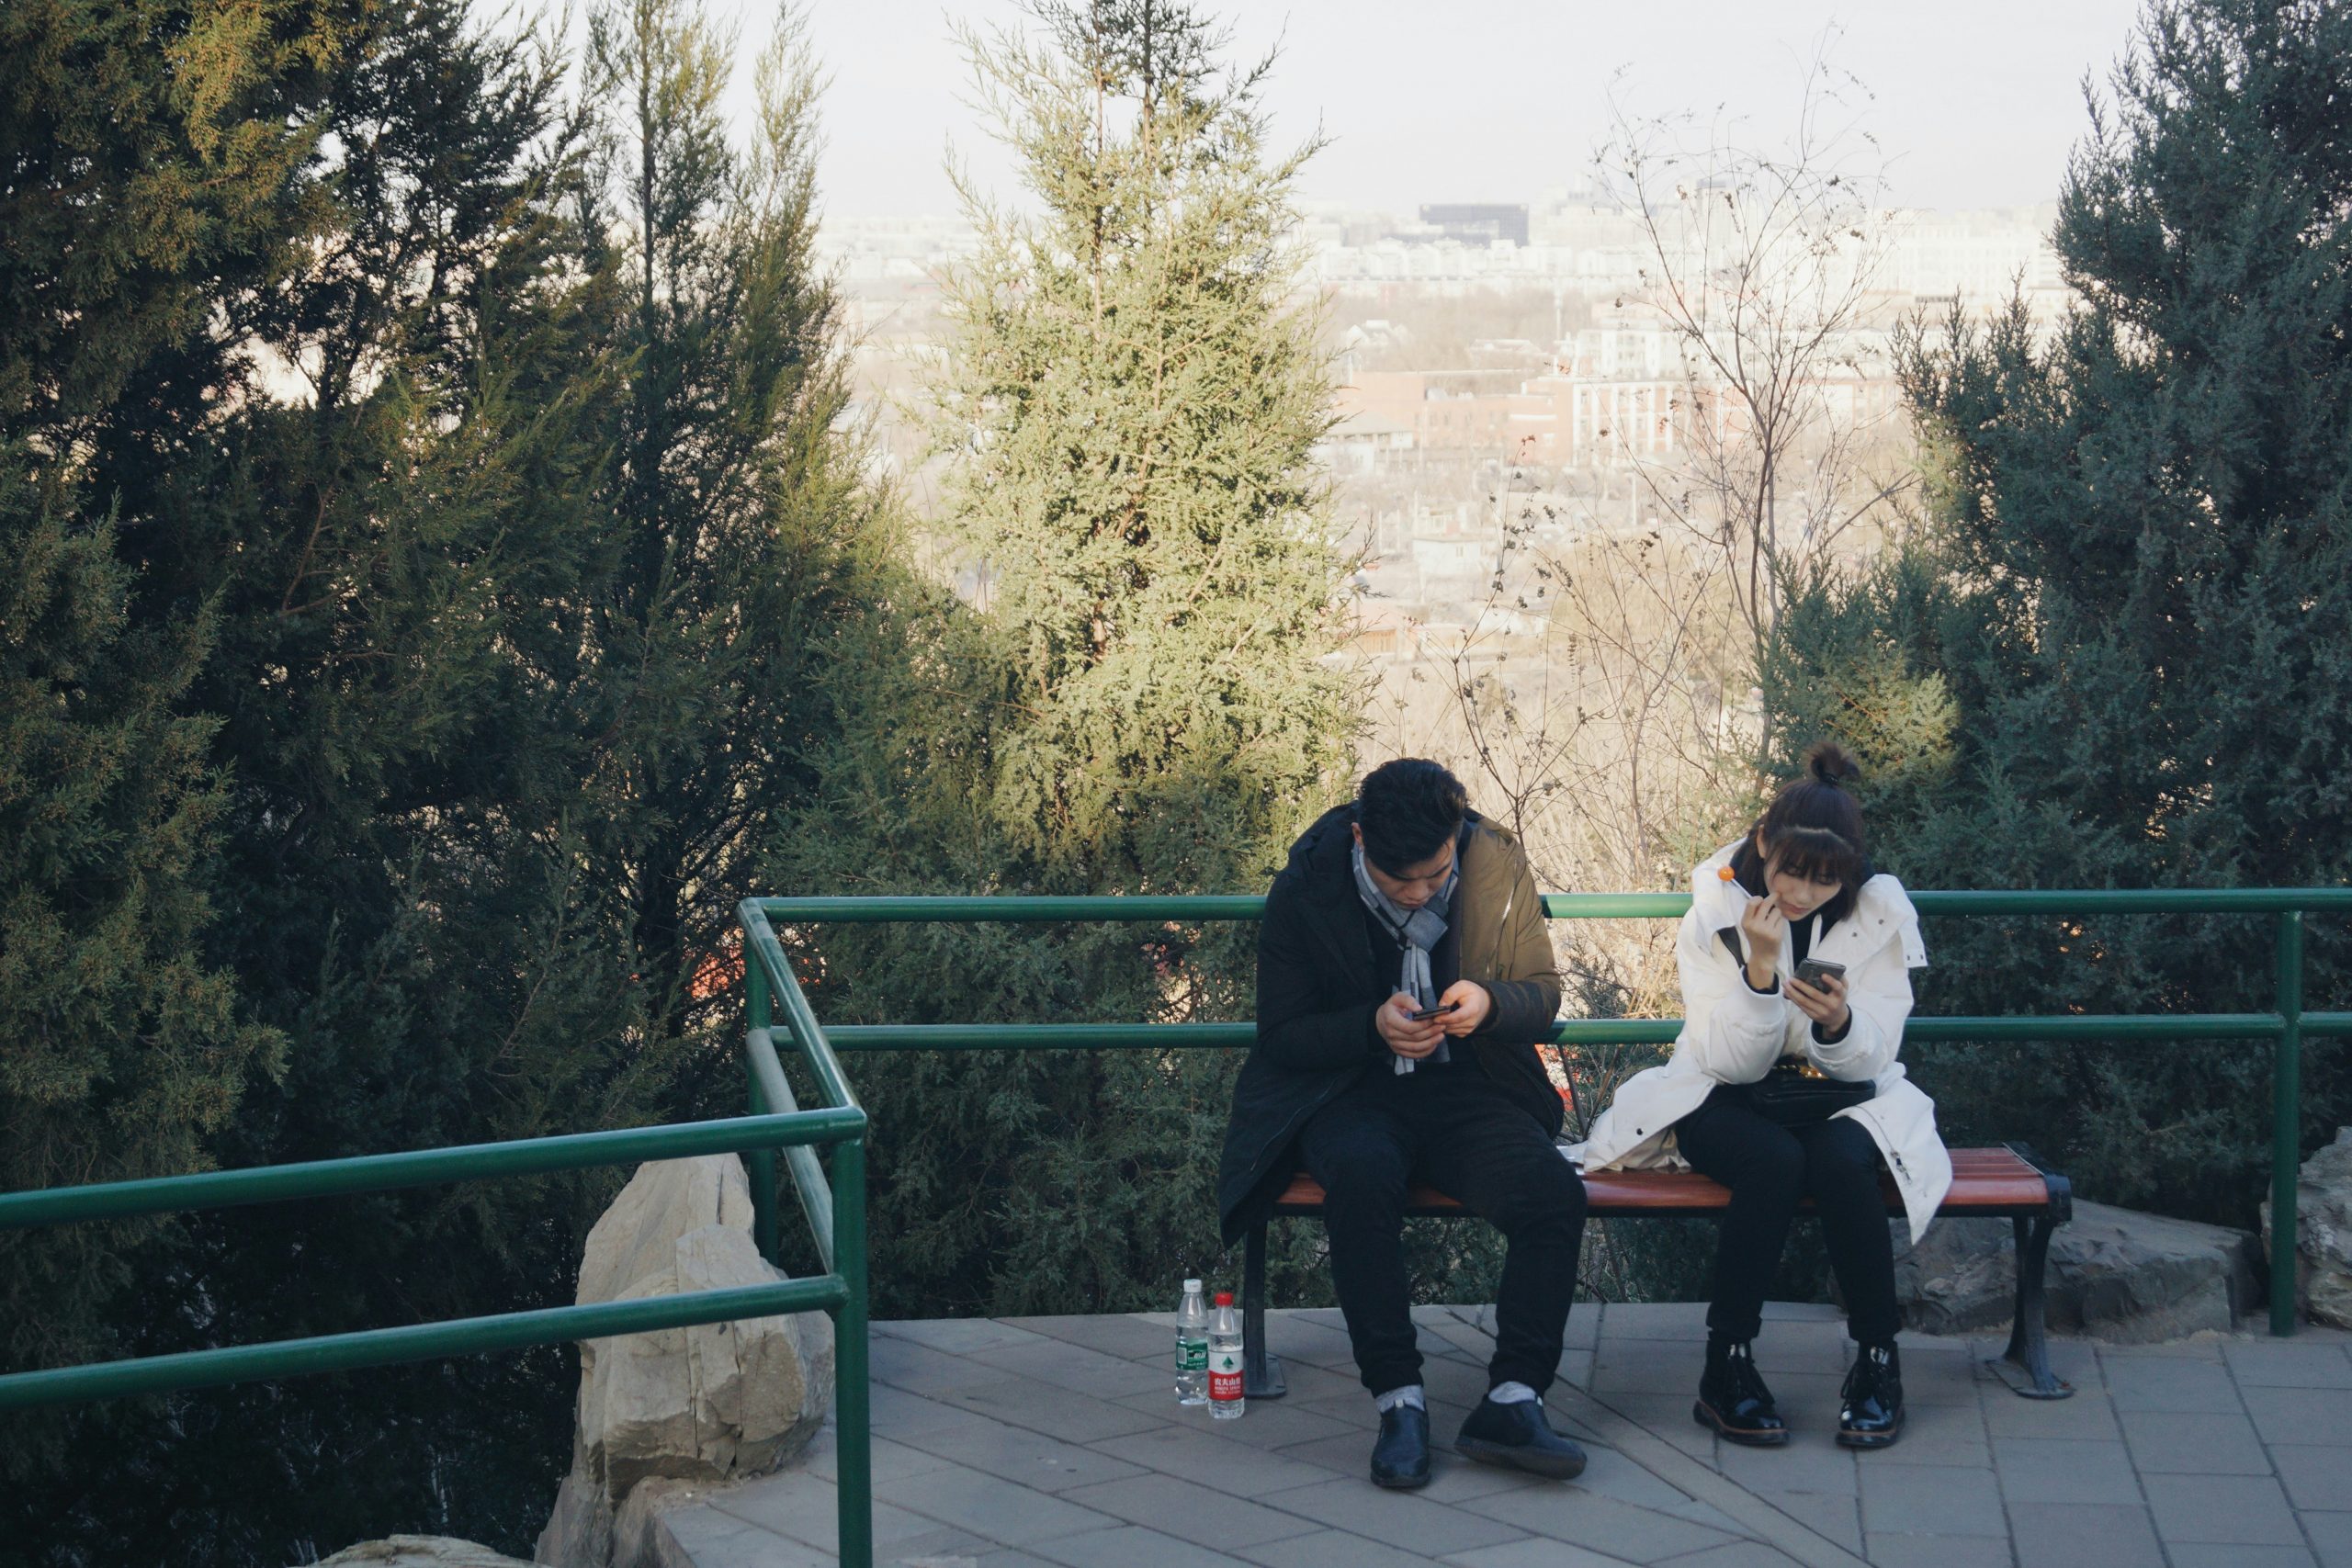 Two people sitting next to each other on a bench in a lovely nature setting, both looking at their phones